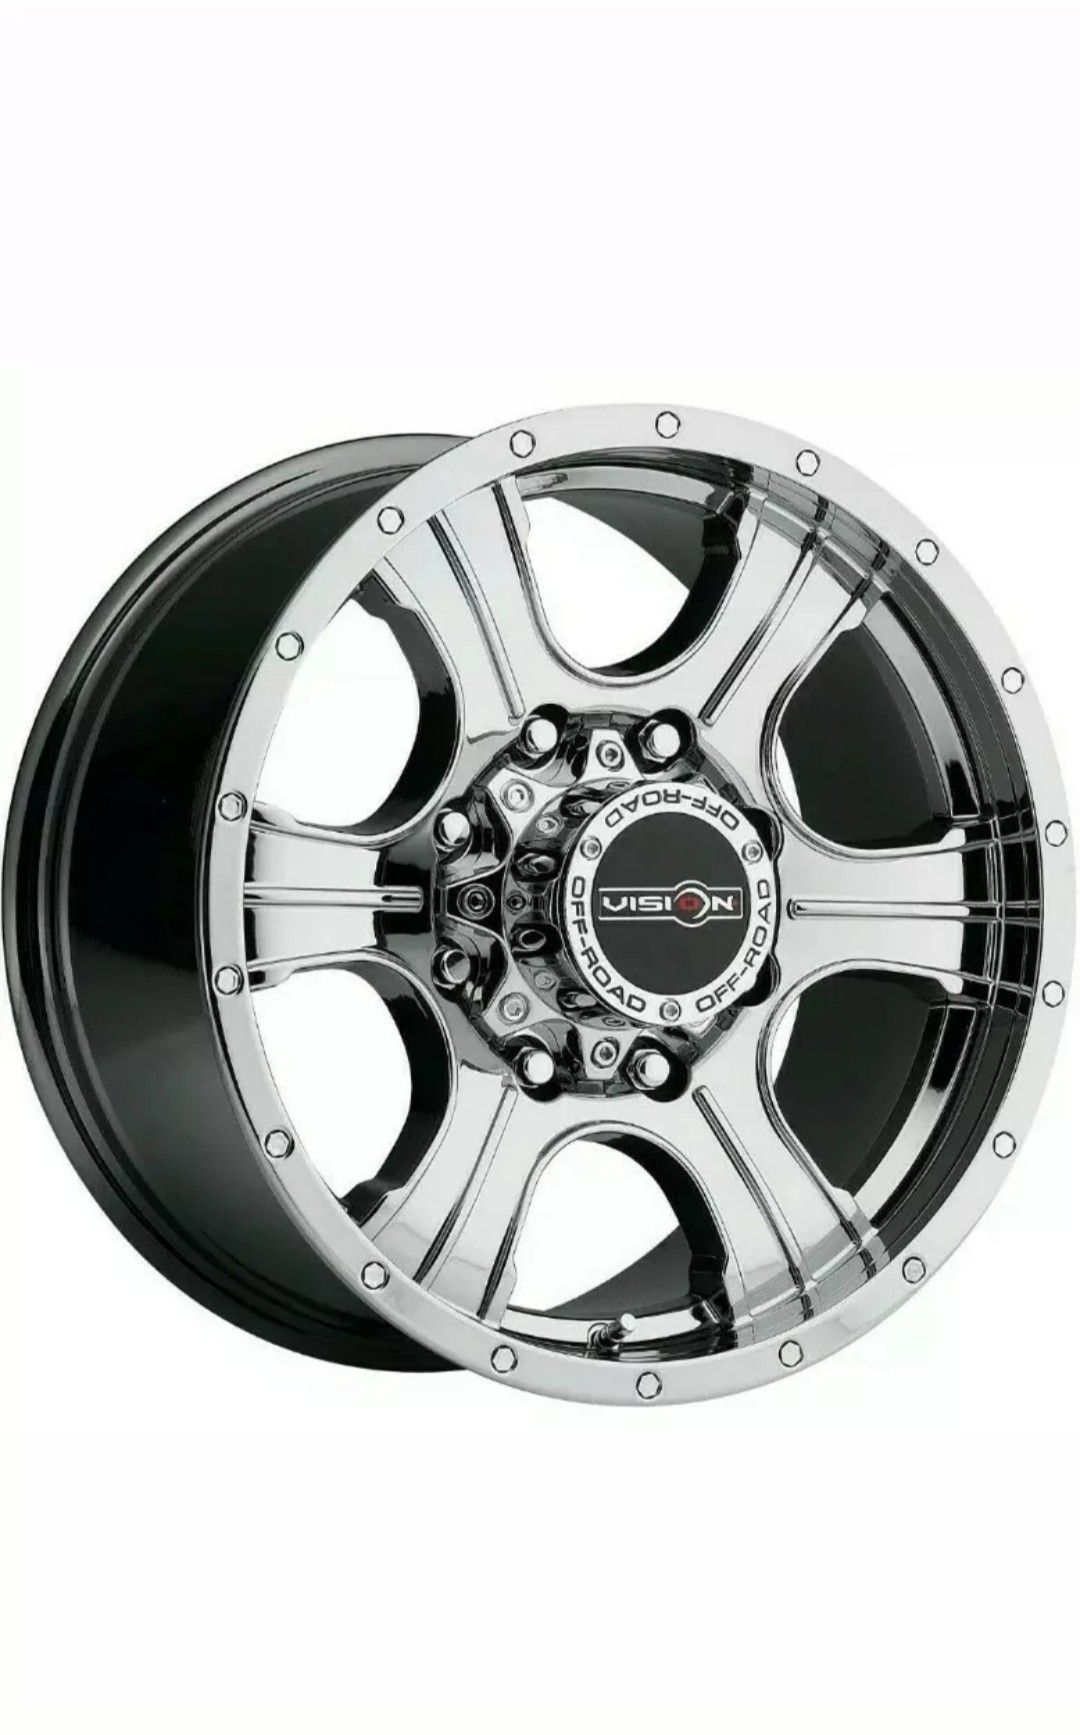 (2) FORD F150 Vision Assassin 20s Wheels 20x9 5x139.7 5x5.5 +0mm PVD Chrome Wheels Rims 396-2985PC0. Condition is New.